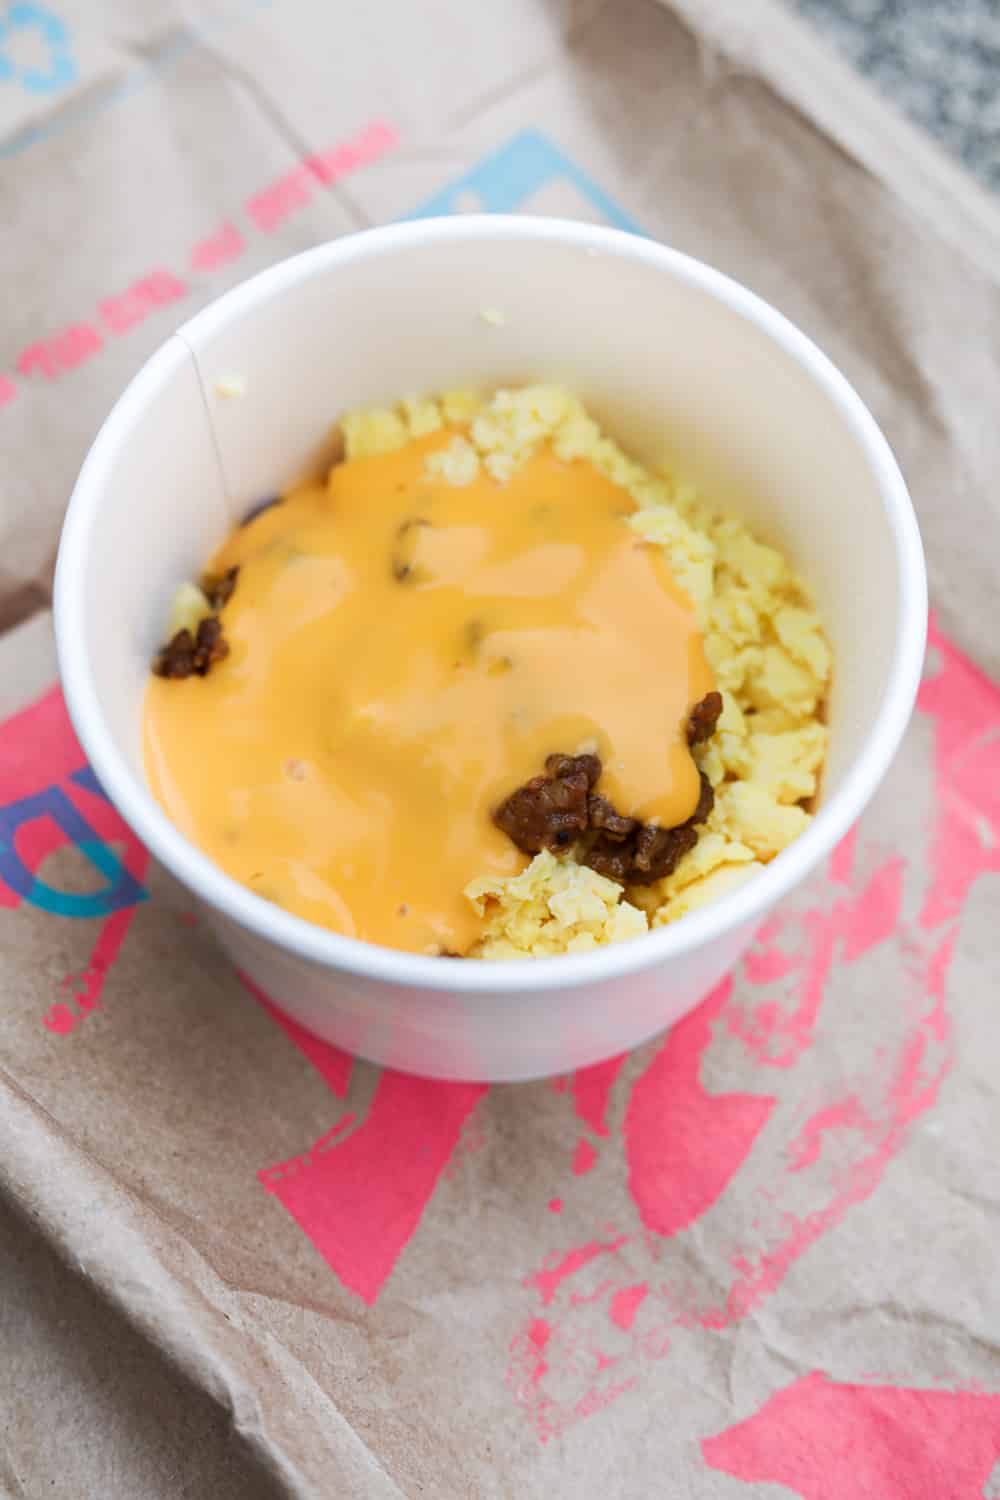 A white cup filled with egg, sausage crumbles, and nacho cheese sauce. The cup is on a brown paper bag.